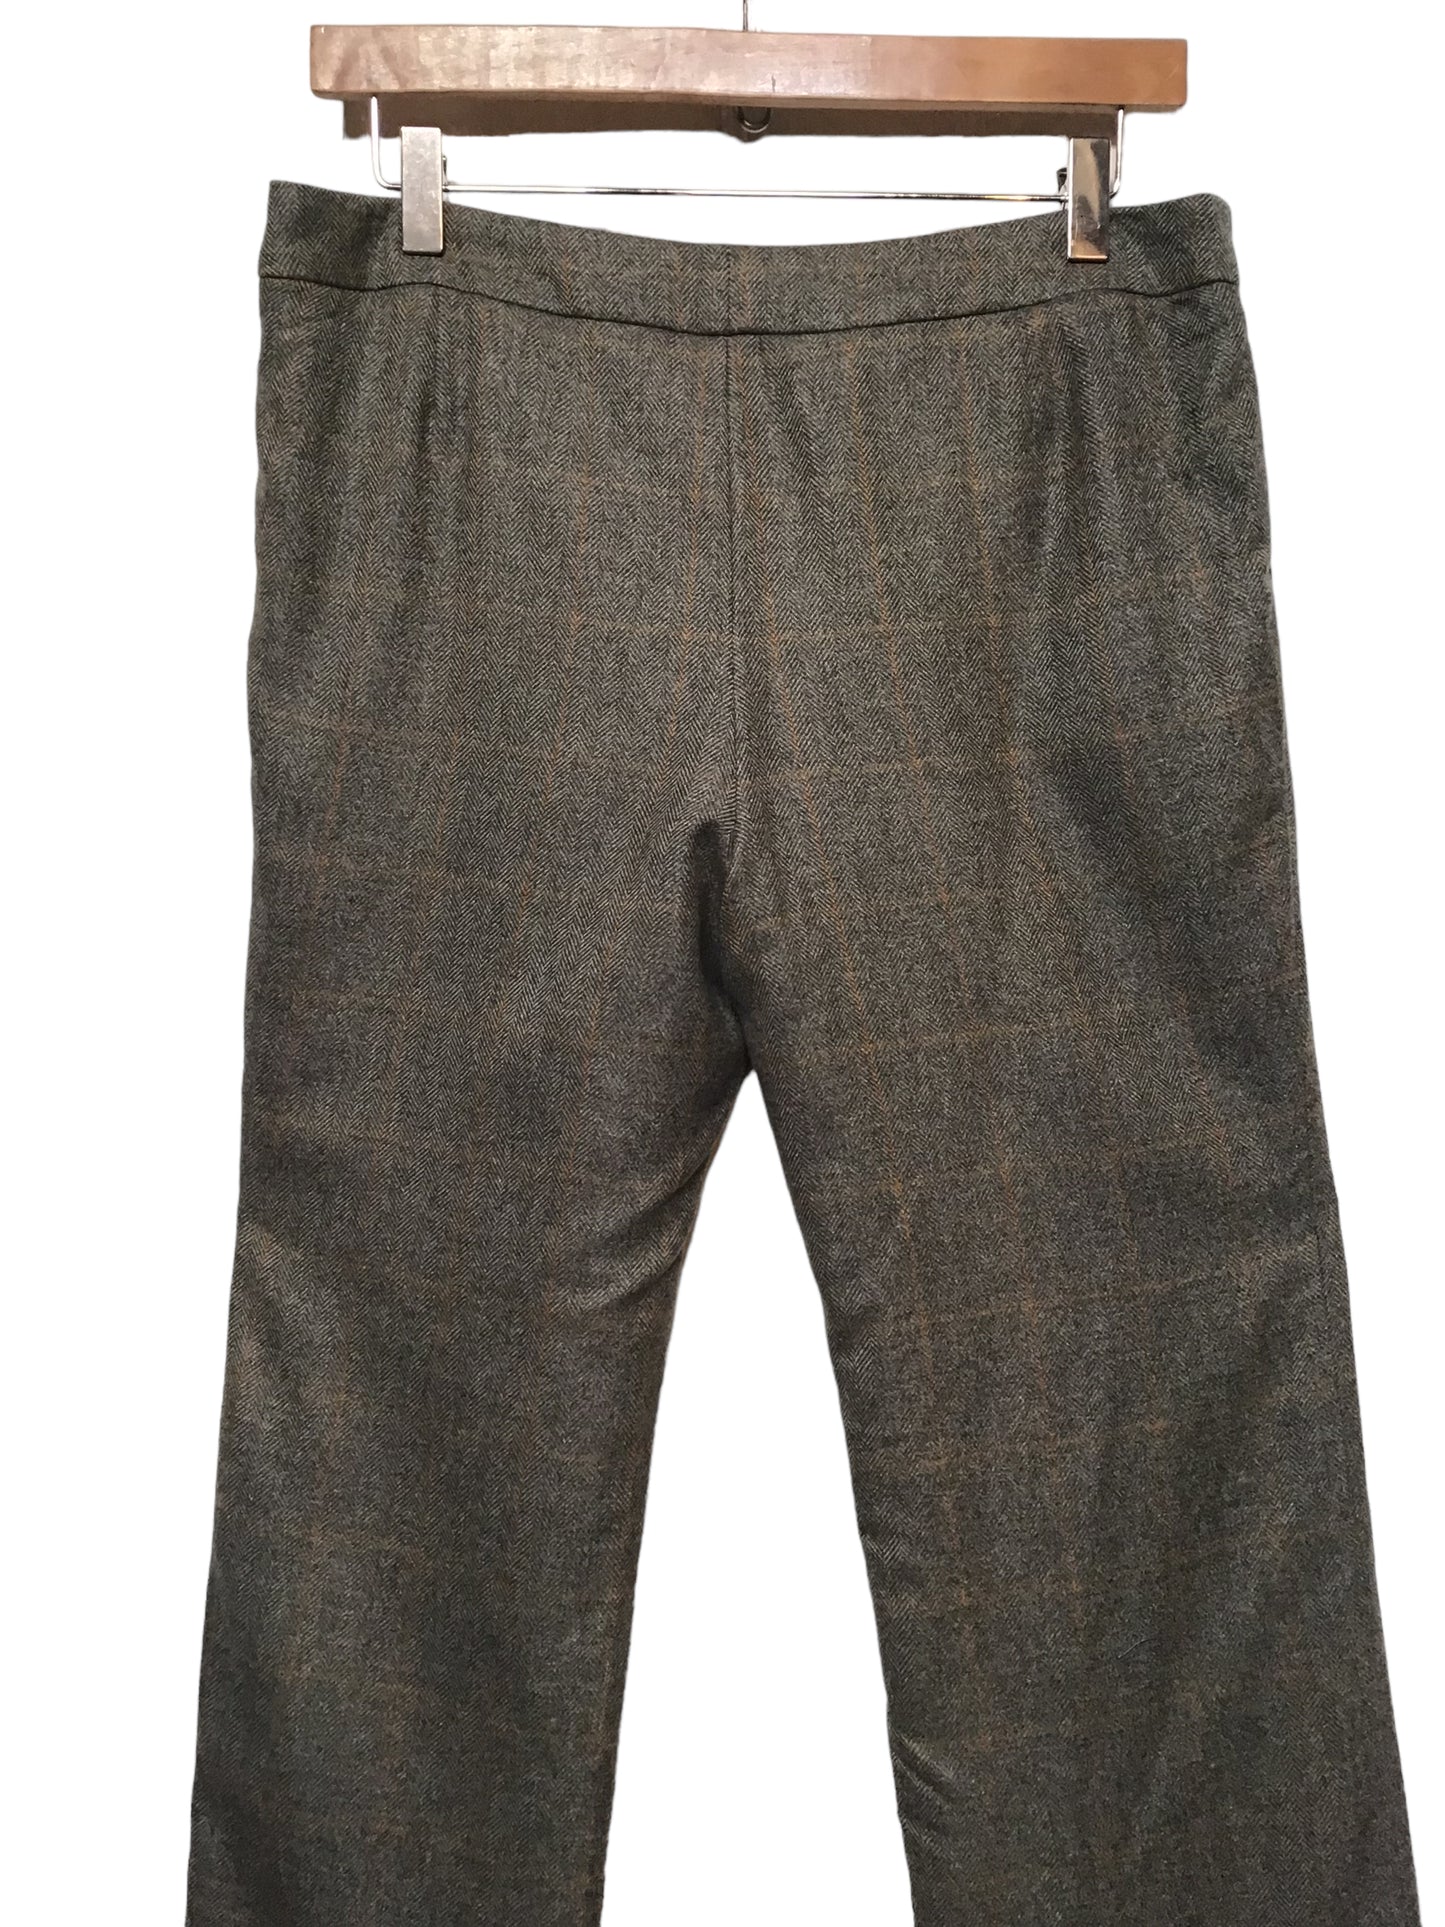 Chequered Thatched Trousers (33x29)